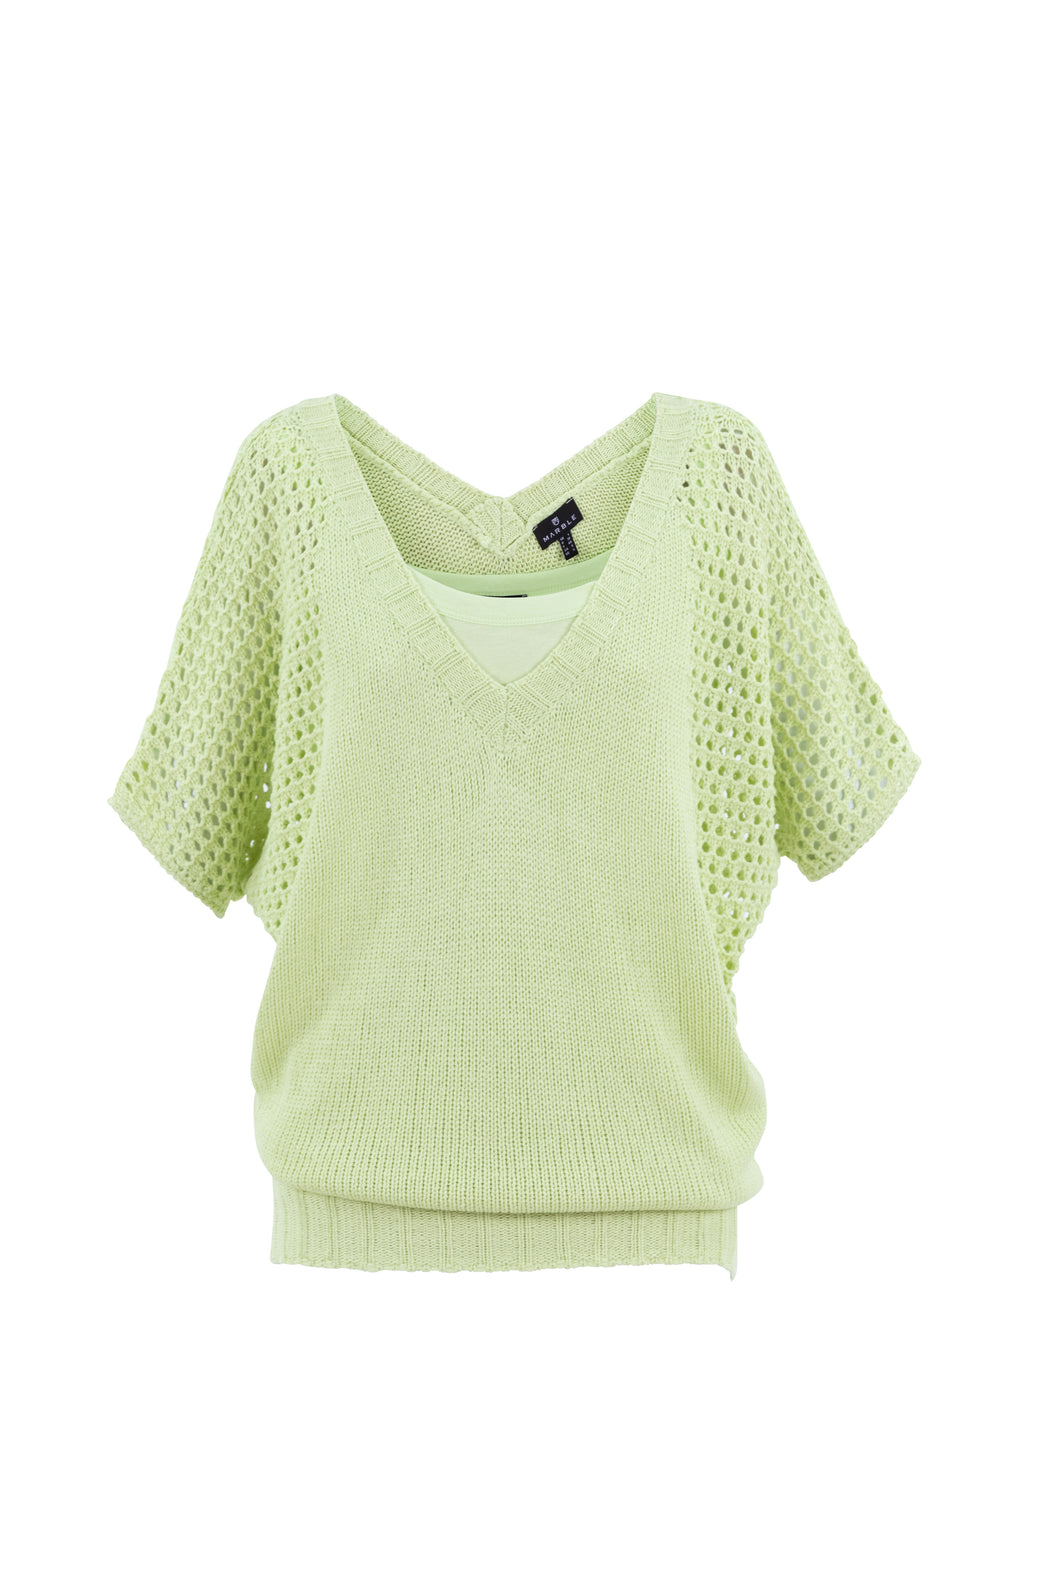 MARBLE 7340 SWEATER WITH VEST TOP COLOUR 216 LIGHT APPLE